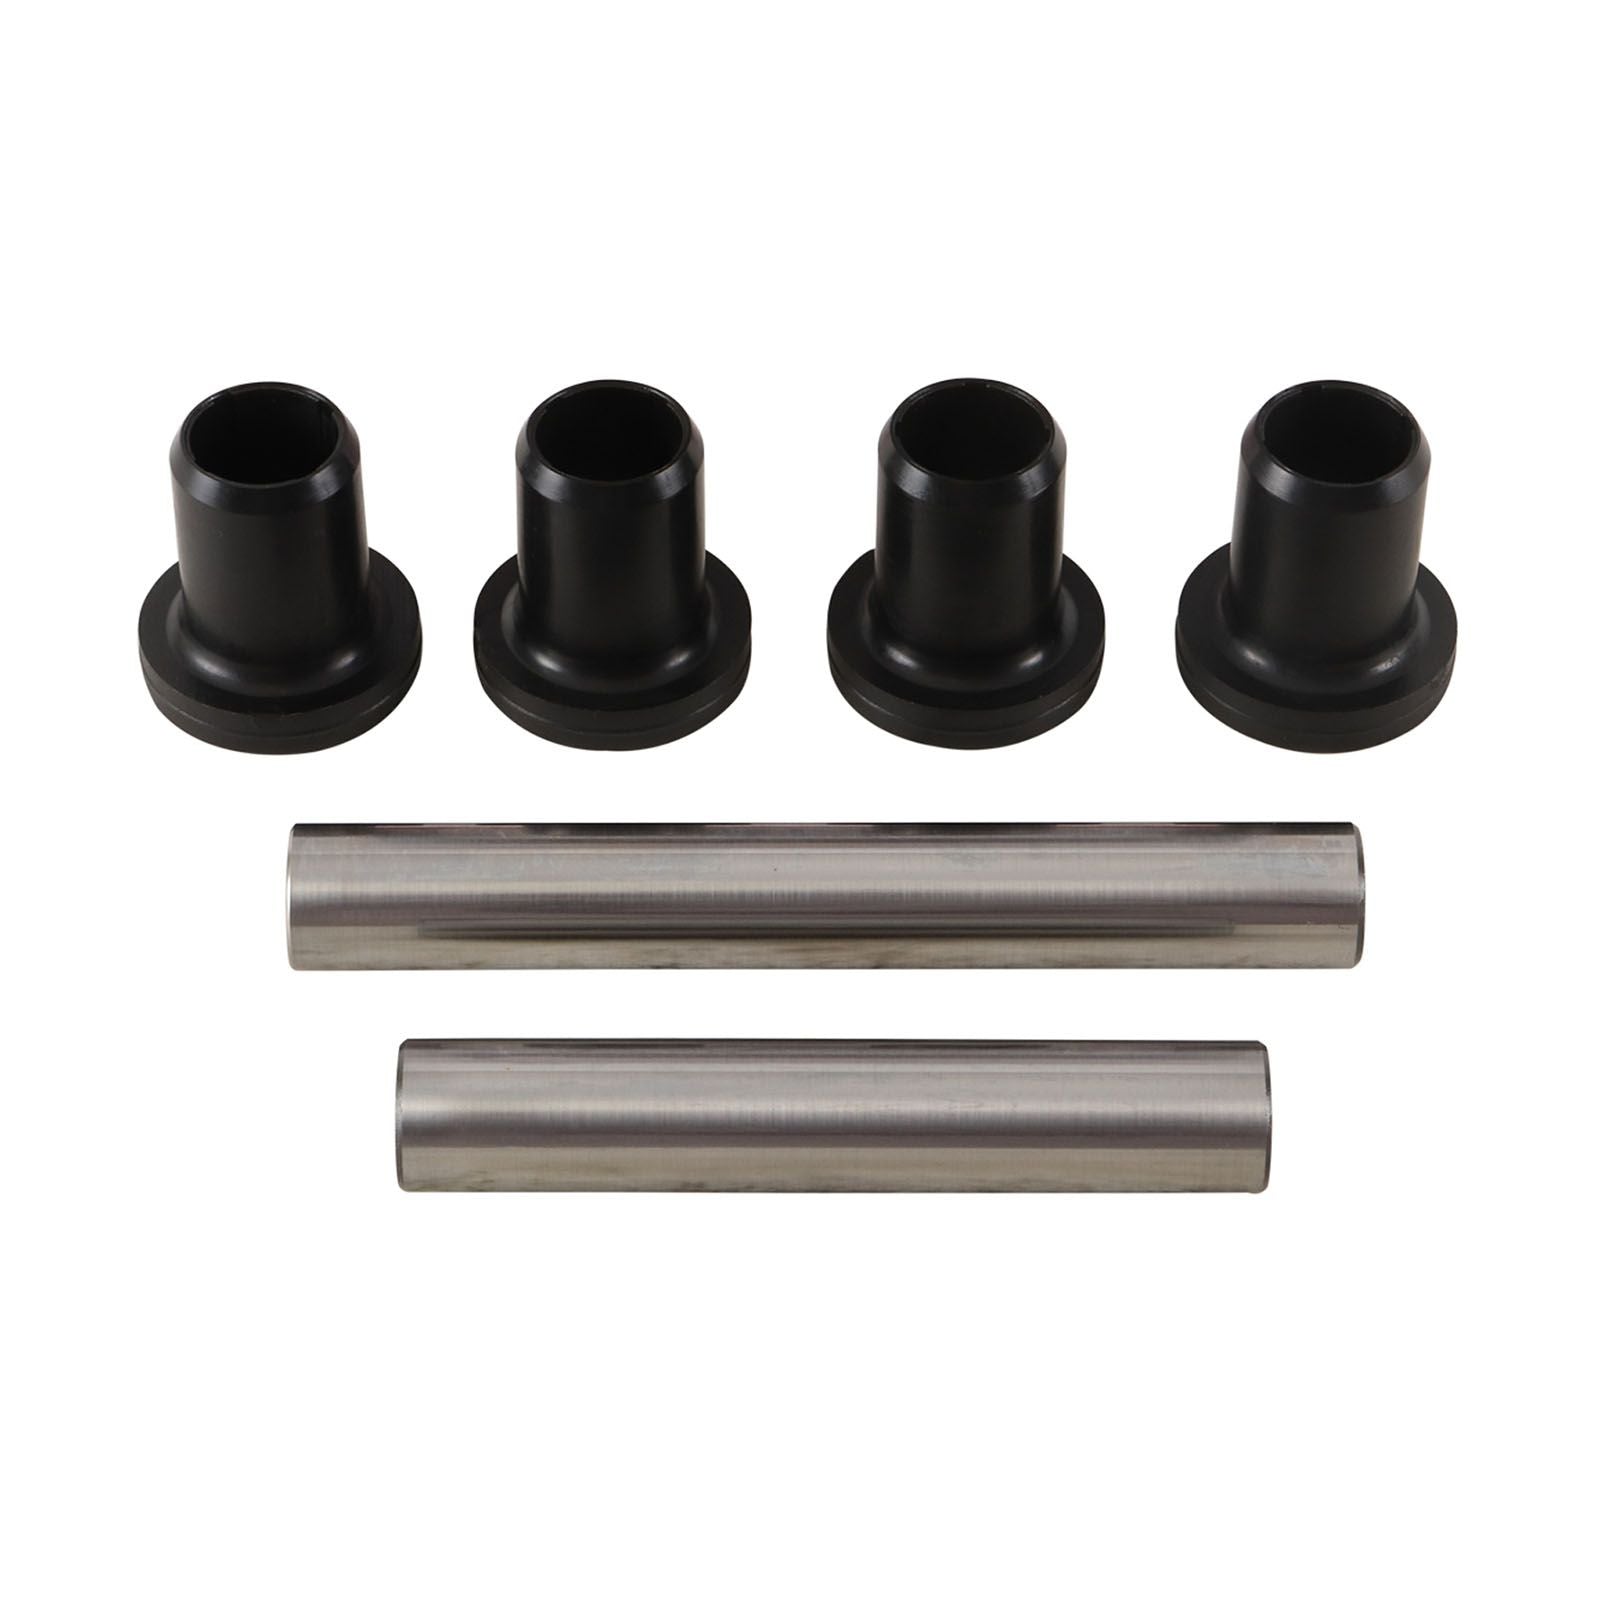 New ALL BALLS Racing Independent Suspension Knuckle Only Kit - Rear #AB501218